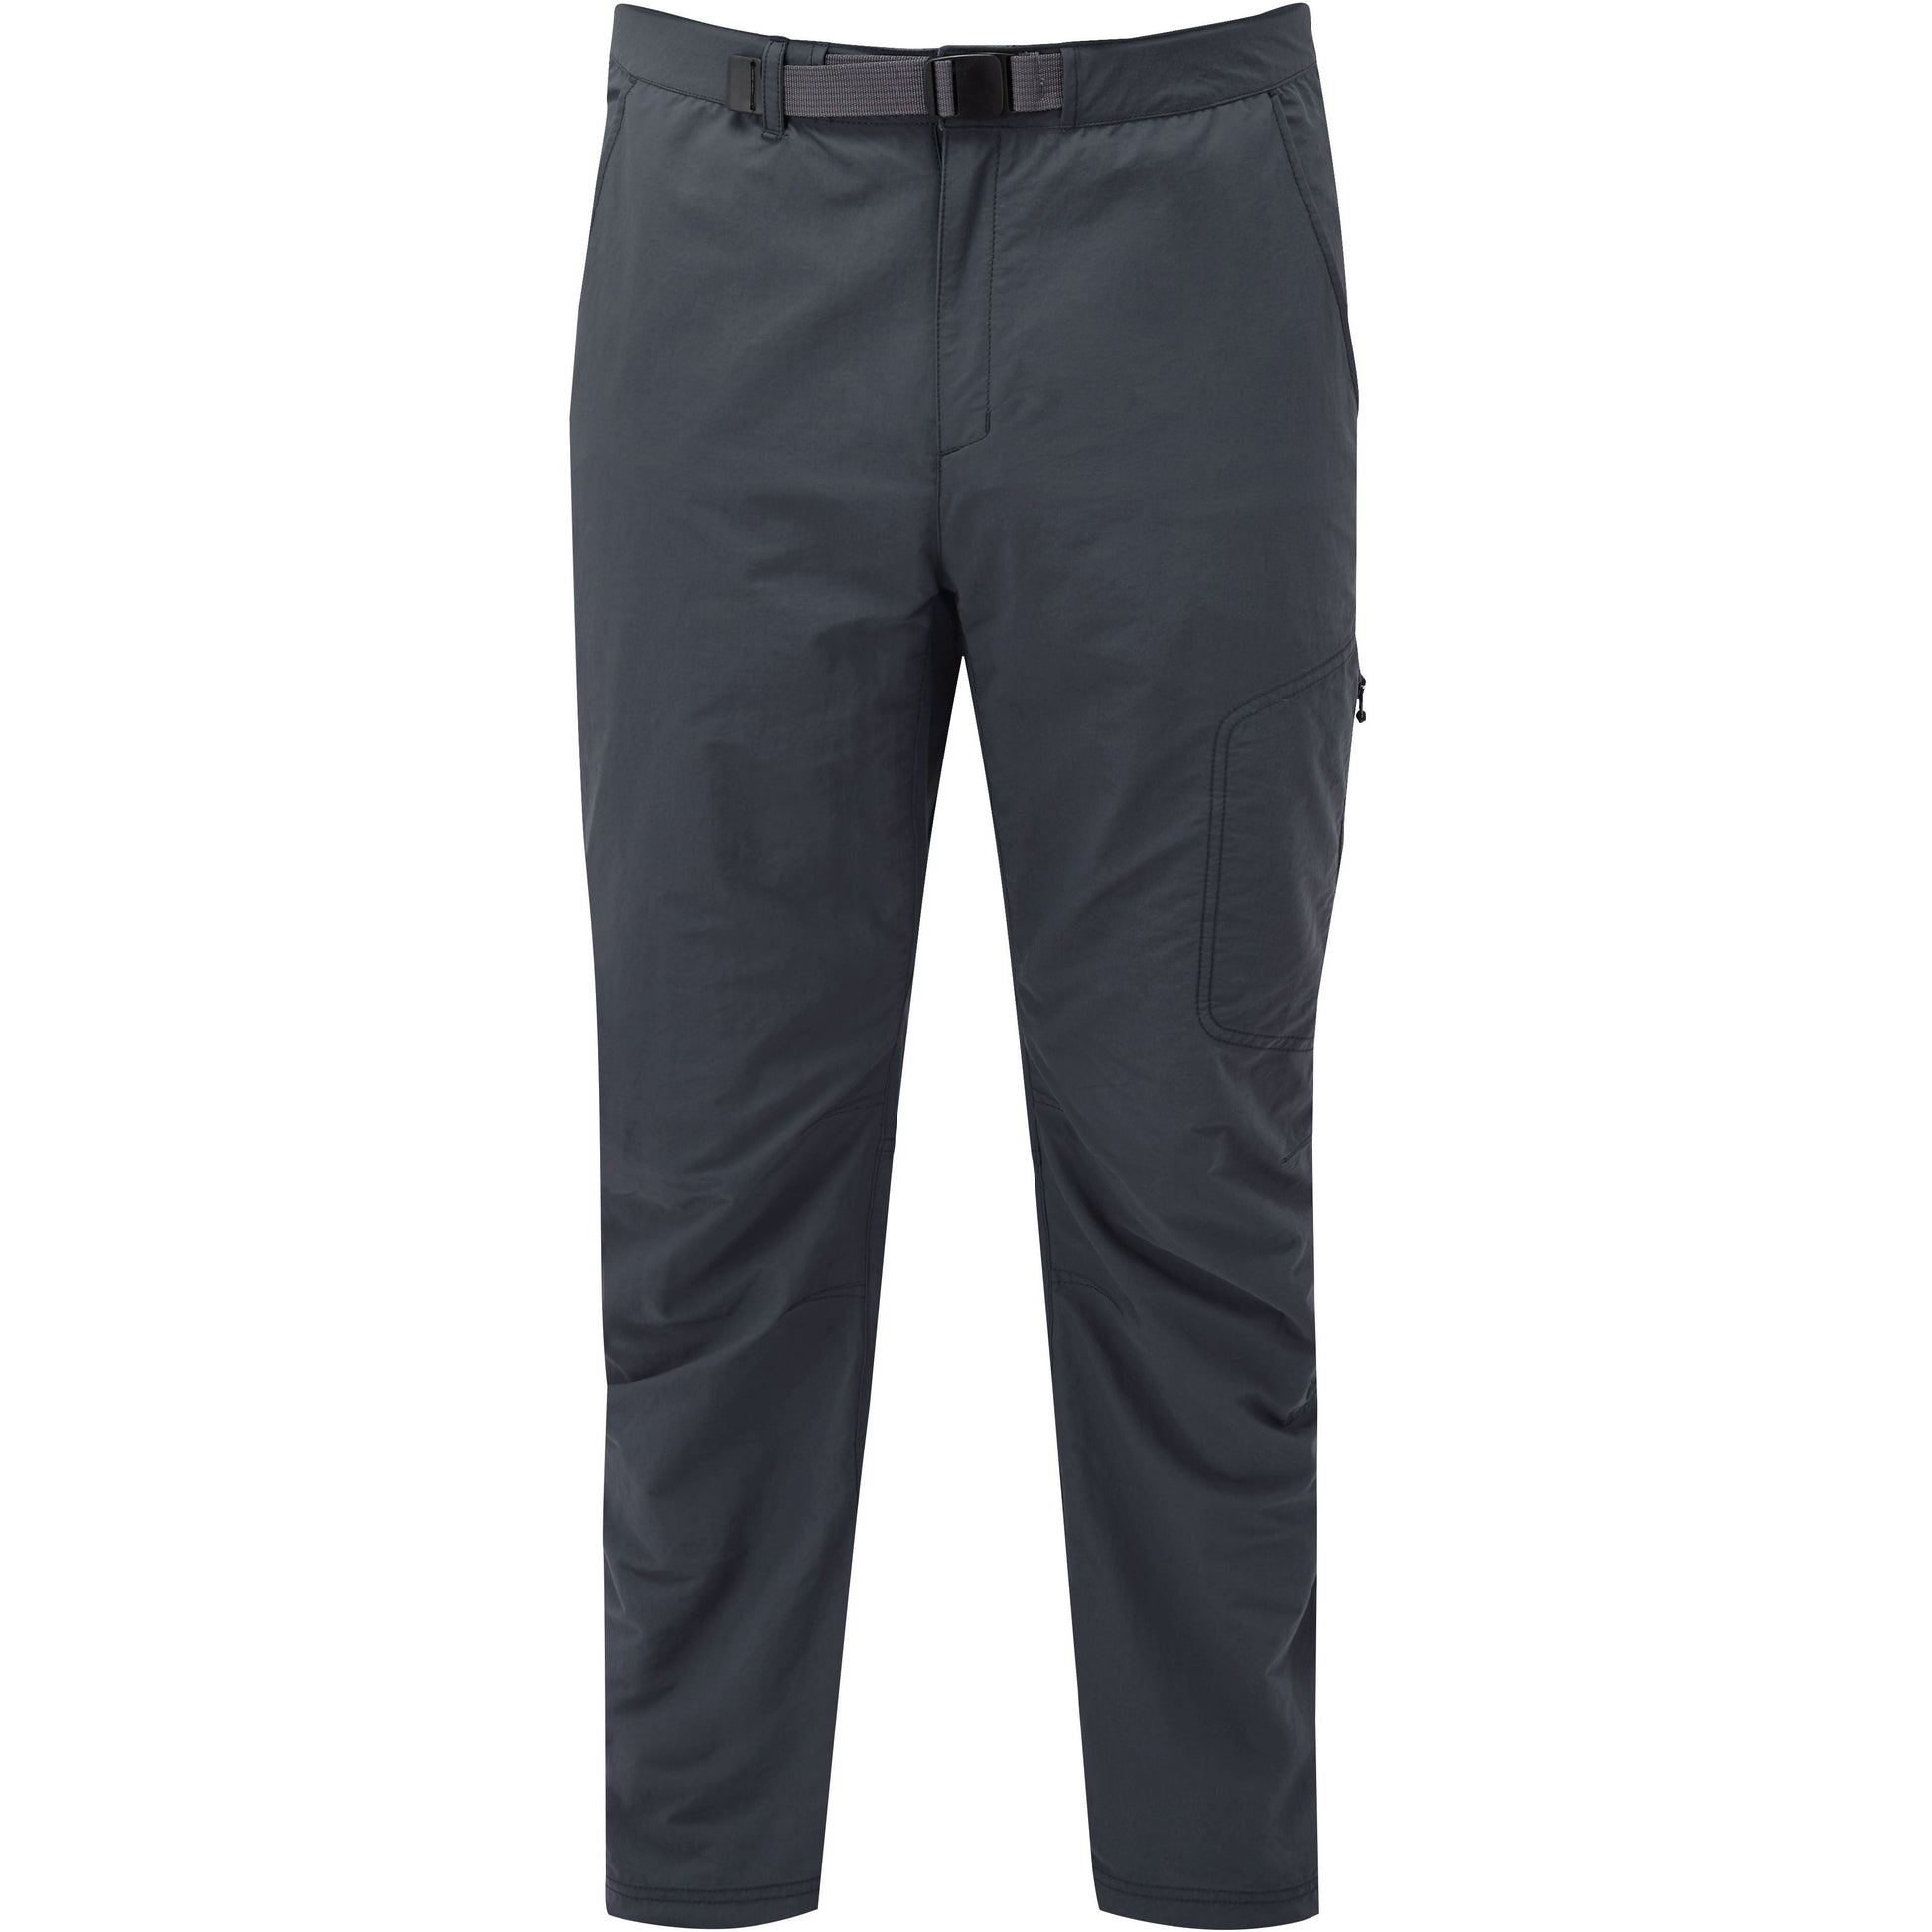 Mountain Equipment Men's Approach Pant Available in three leg lengths